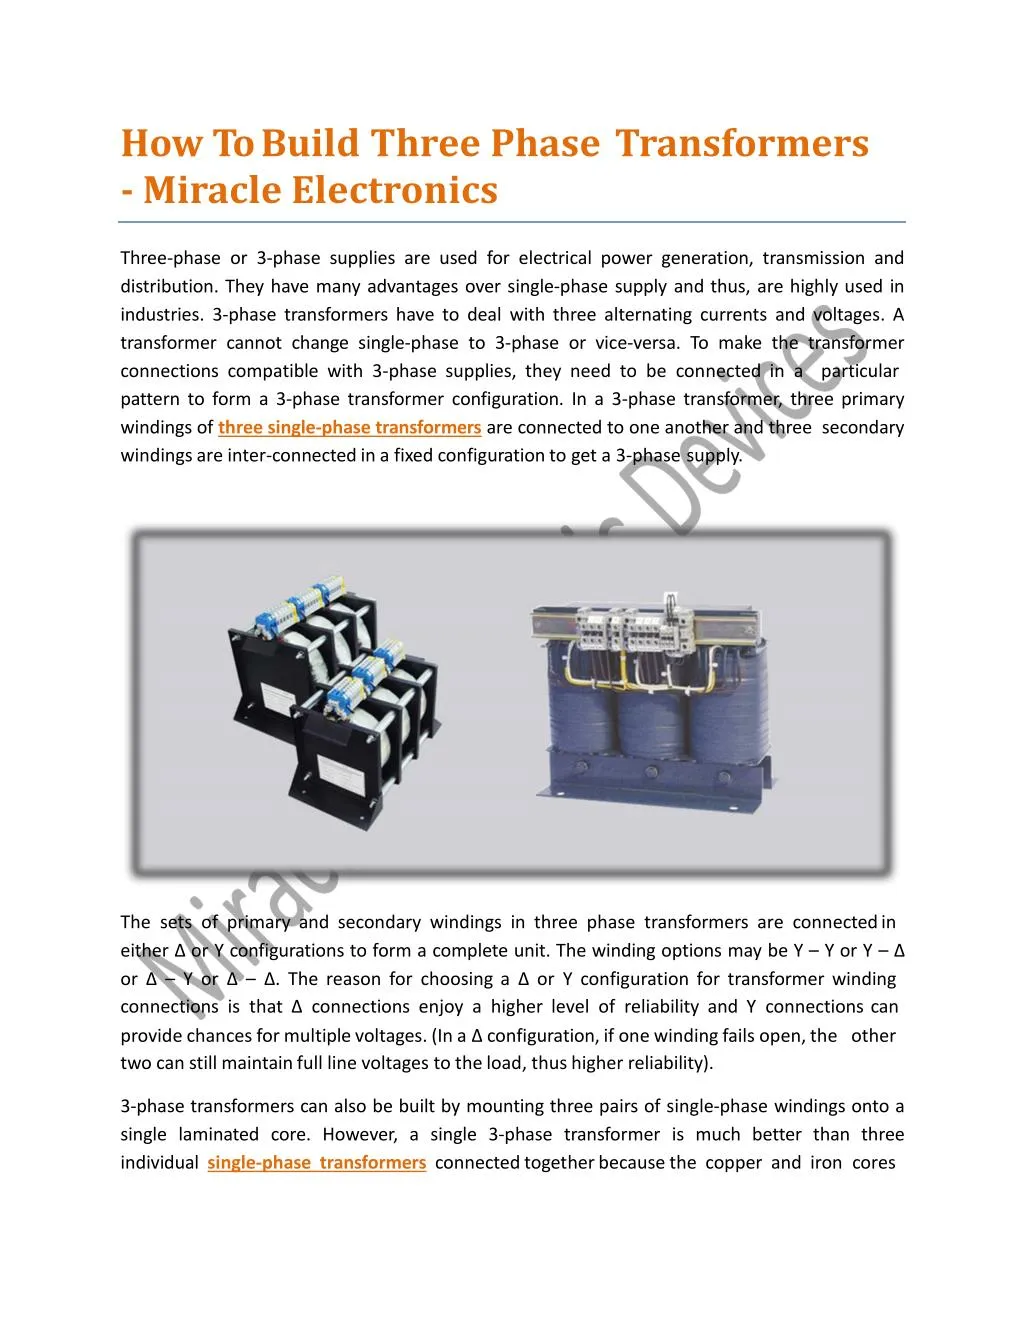 how to build three phase transformers miracle